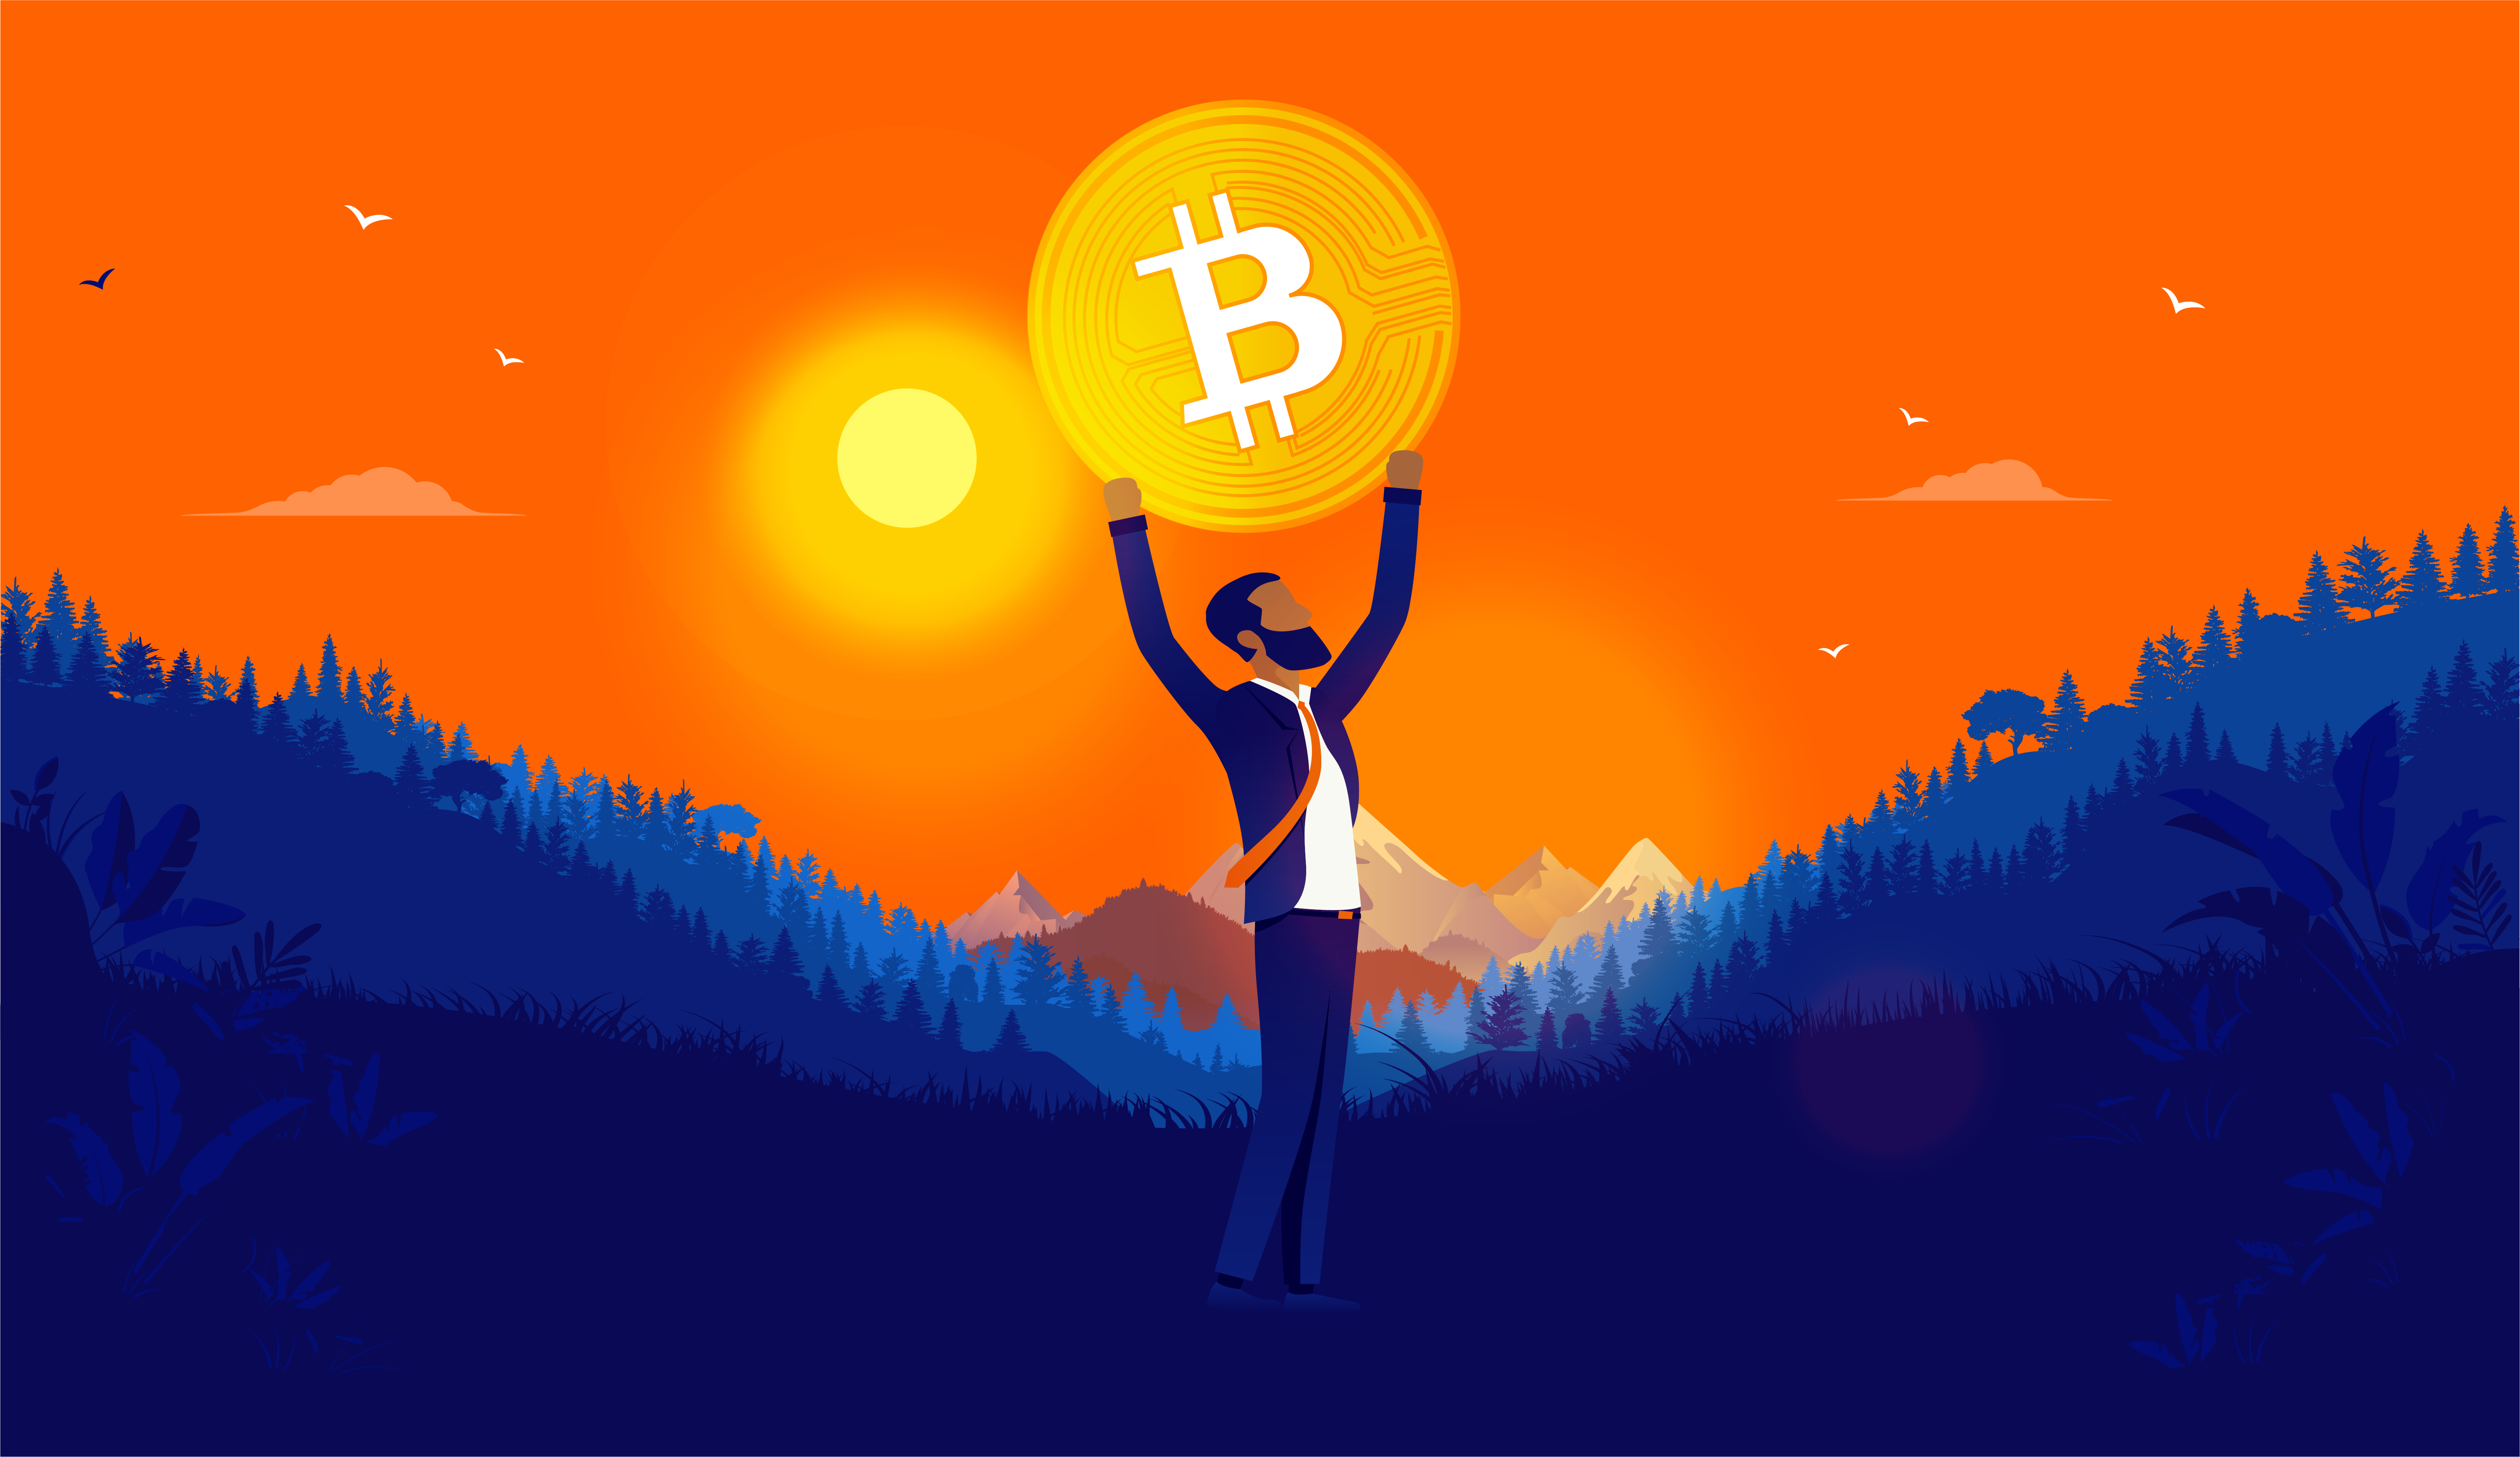 Illustration of a man with a beard in the mountains holding a large bitcoin over his head.